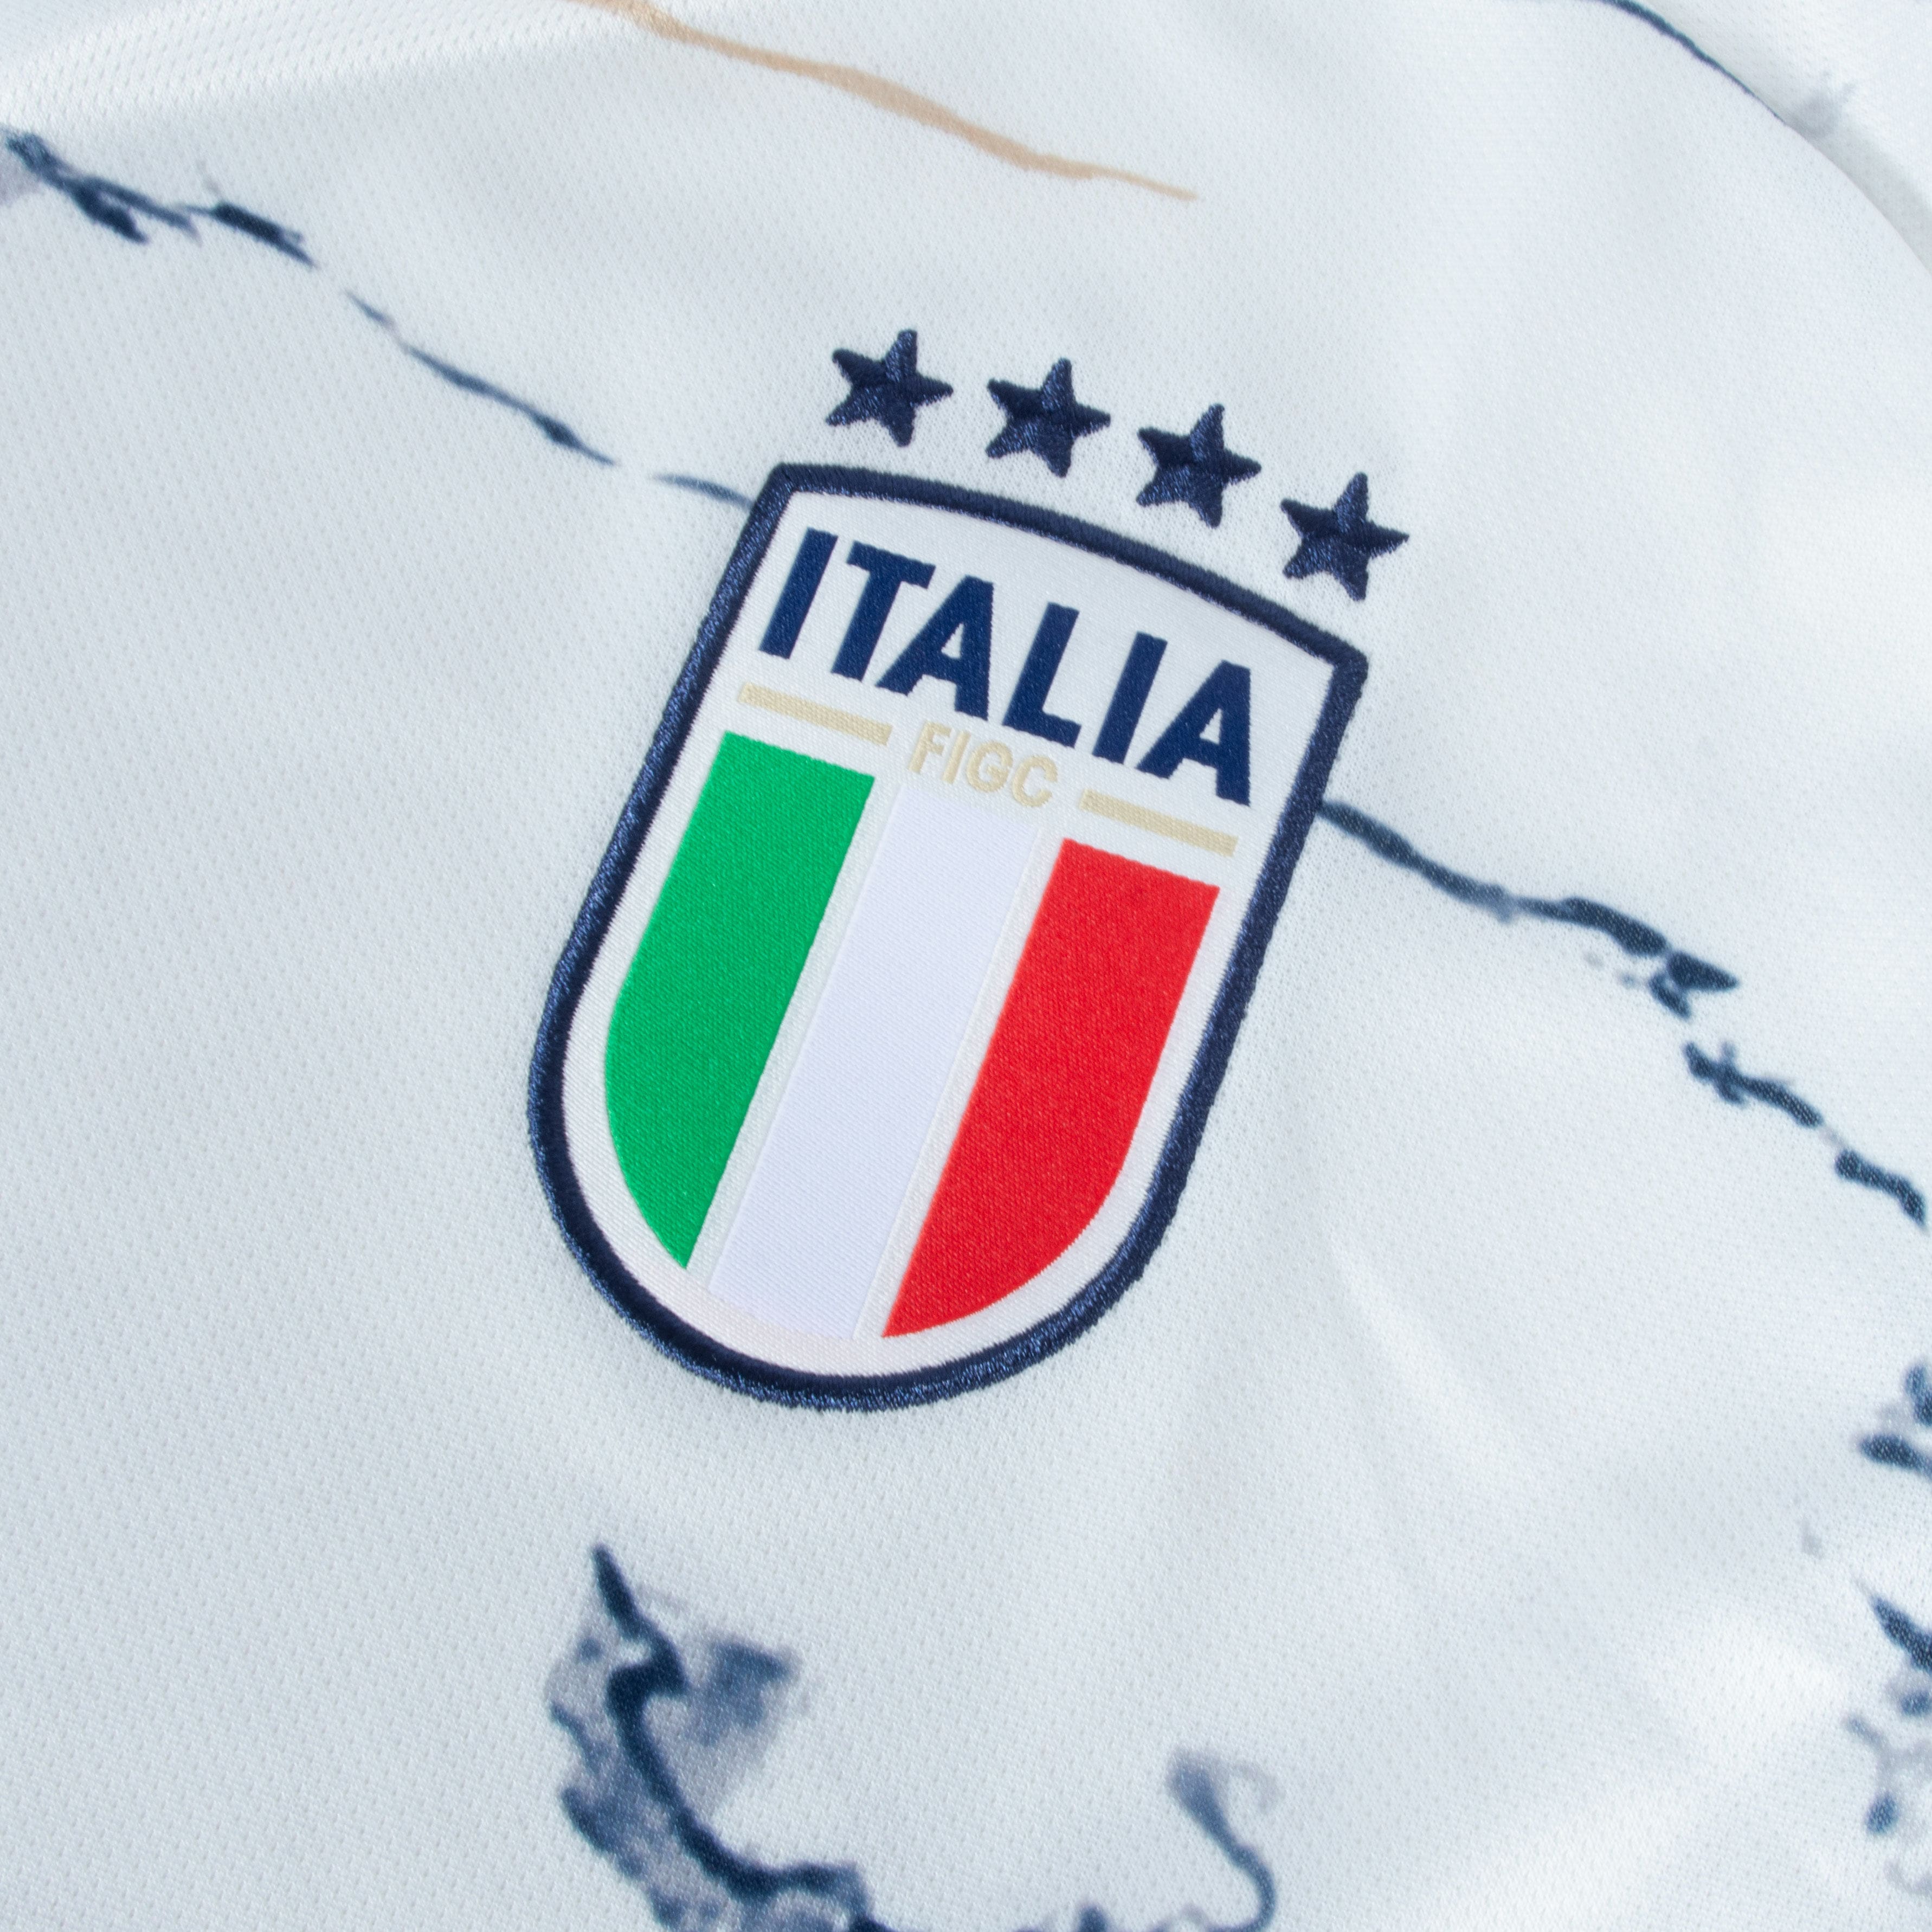 Italy Away Jersey 22/23 Euro 2024 Qualification